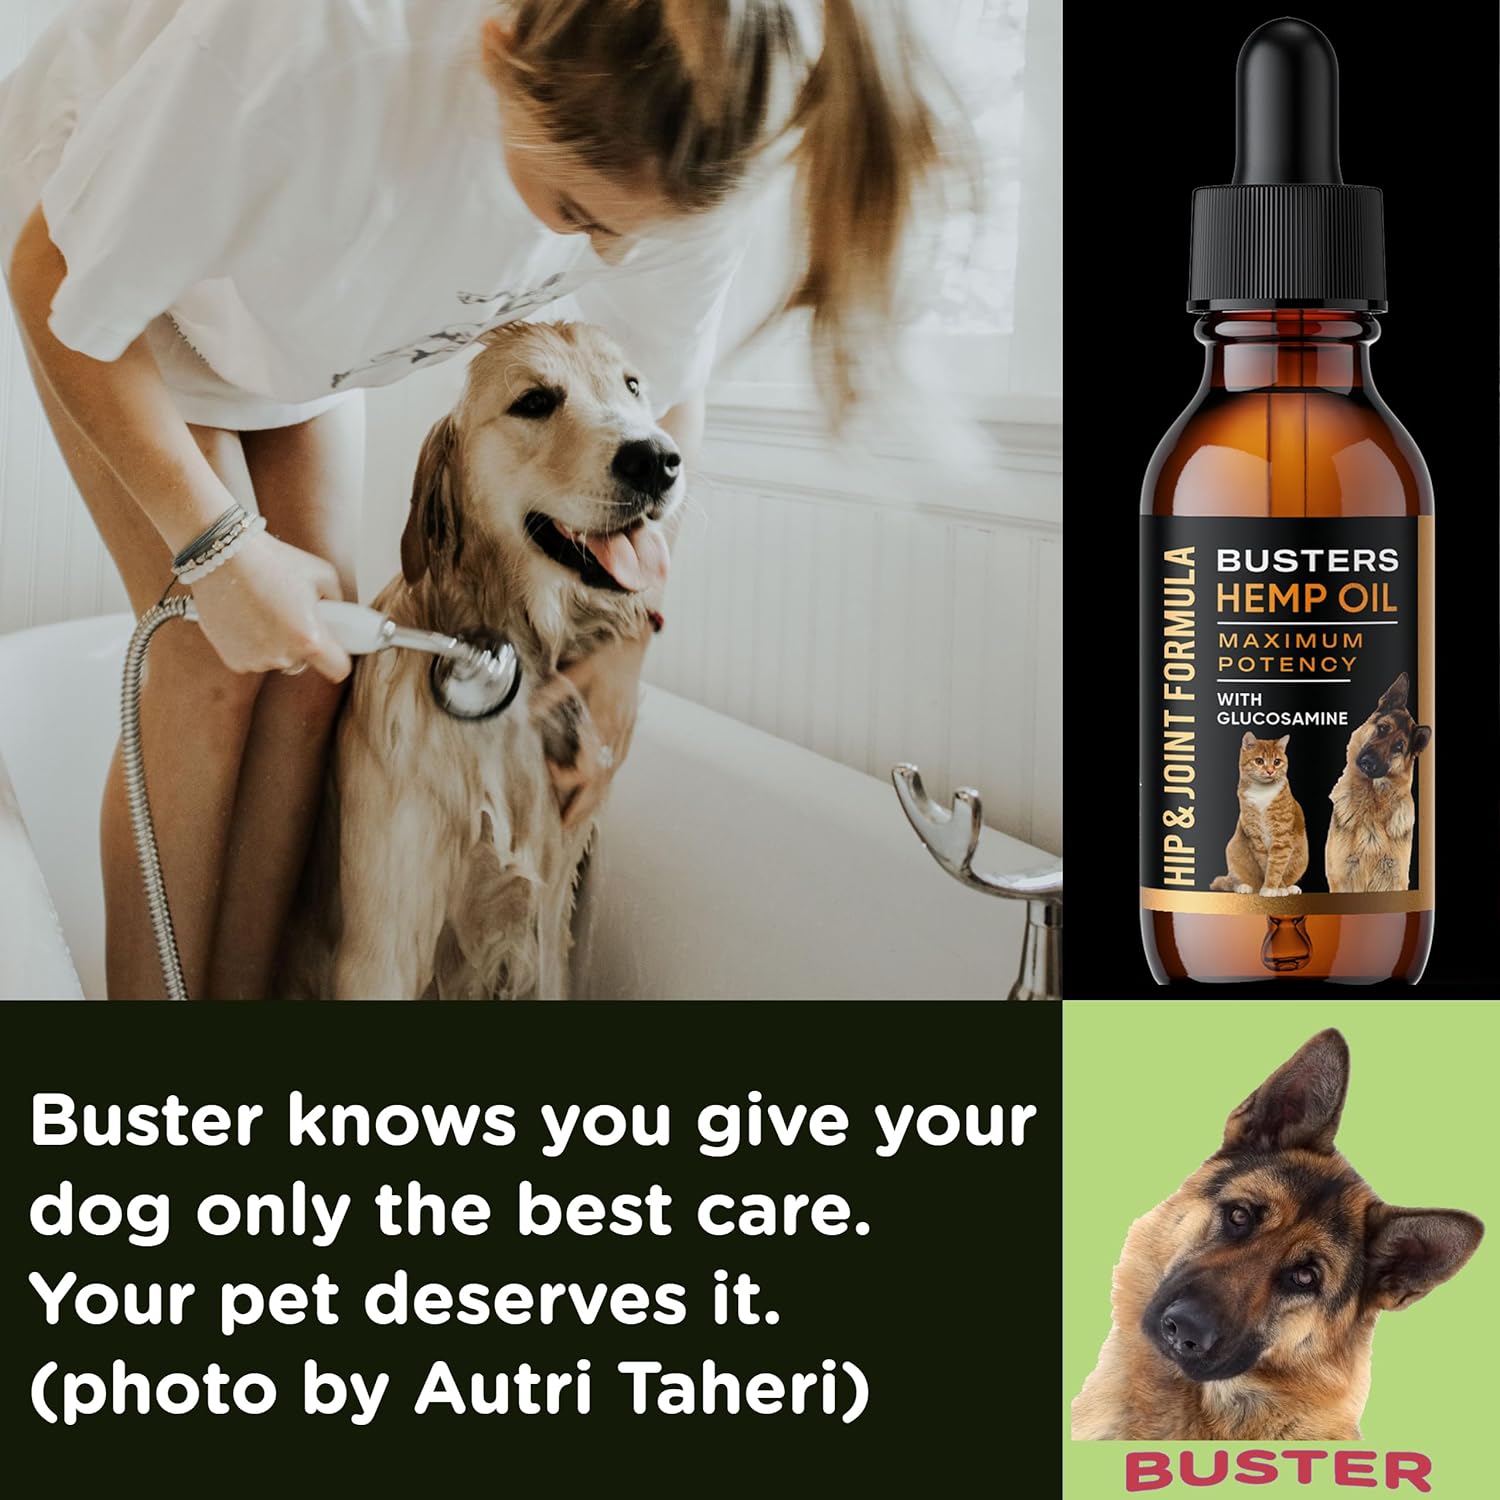 Busters Hip and Joint Hemp Oil Formula enriched with Glucosamine, Pain Relief for Dogs and Pets, Arthritis, and Advanced Mobility Support : Pet Supplies